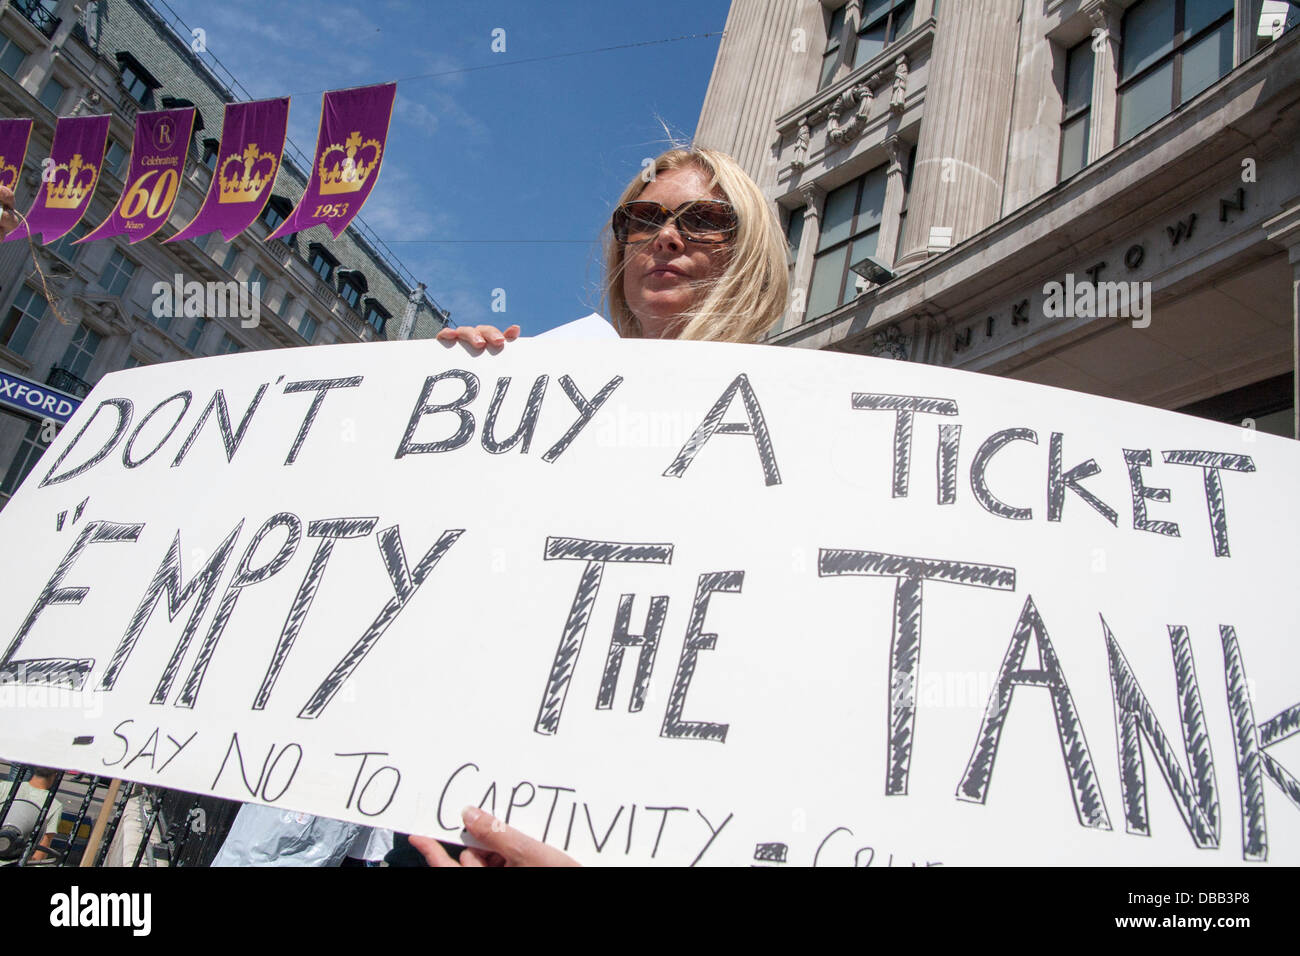 London, UK. 27th July 2013. A banner urges people not to visit marine parks as protesters in London and around the world demonstrate against marine mamals held captive for entertainment. Credit:  Paul Davey/Alamy Live News Stock Photo